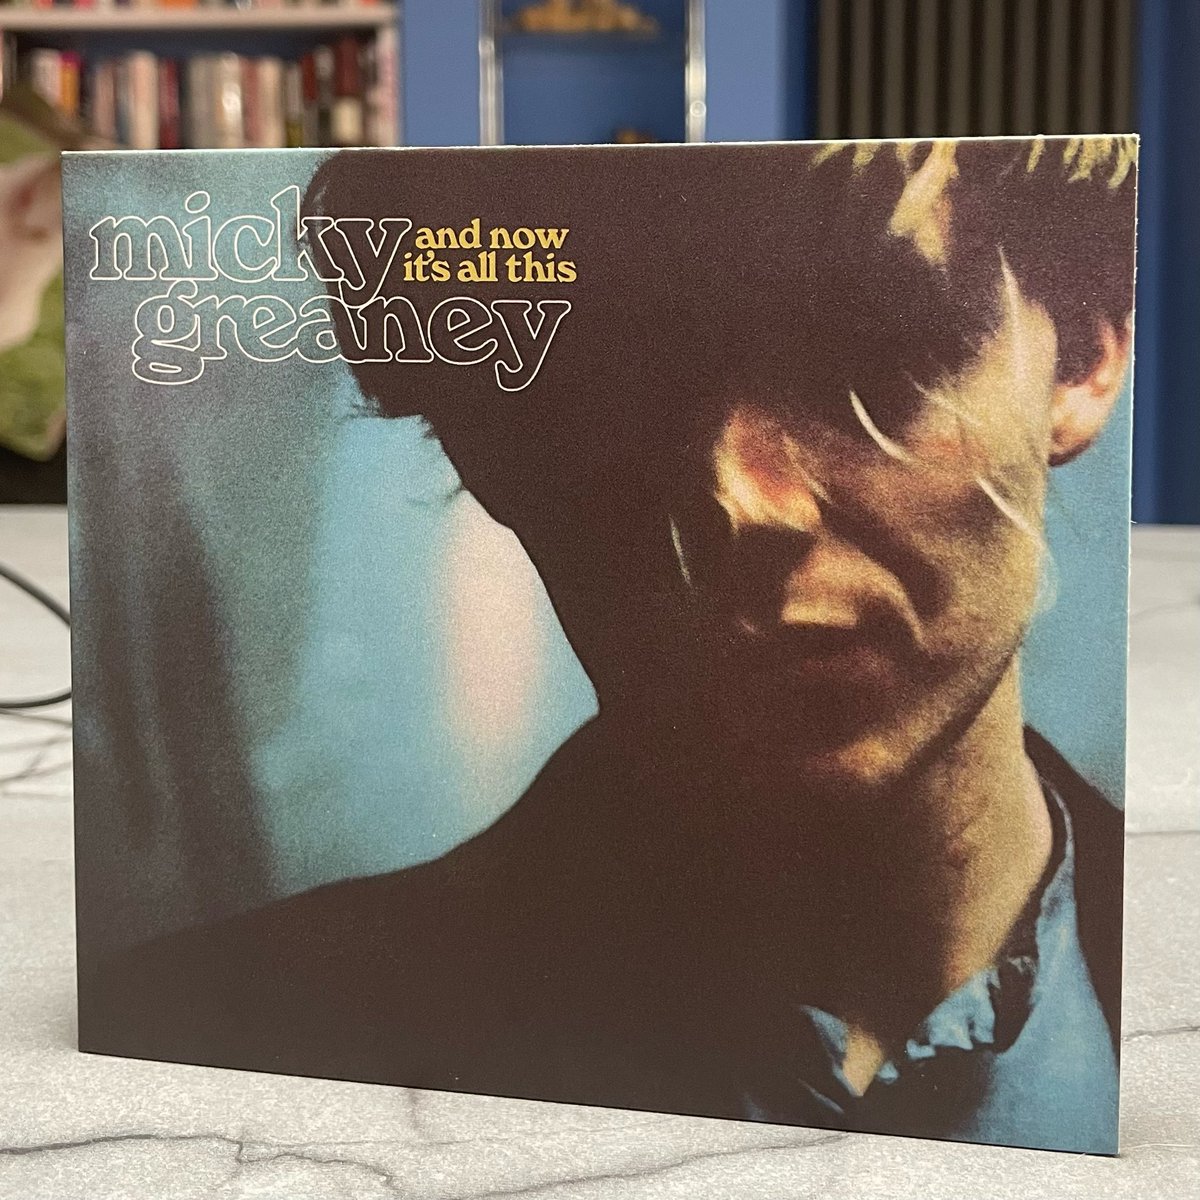 Pleased to report that pre-orders for vinyl LP, CD and download of Micky Greaney’s new album “And Now It’s All This” available at mickygreaney.bandcamp.com @davidjhaskins @TheLilacTime @glassmodern1 @johnnyp_p @GoldbergRadio @augstone @ChaddertonMark @PatThomas1964 @jezc @BrumRadio